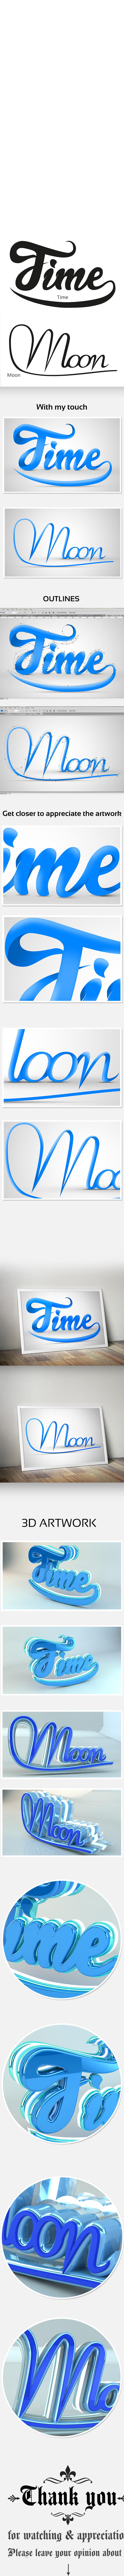 time moon artwork 3D poster calligraphical calligraphic freehand Pen tool